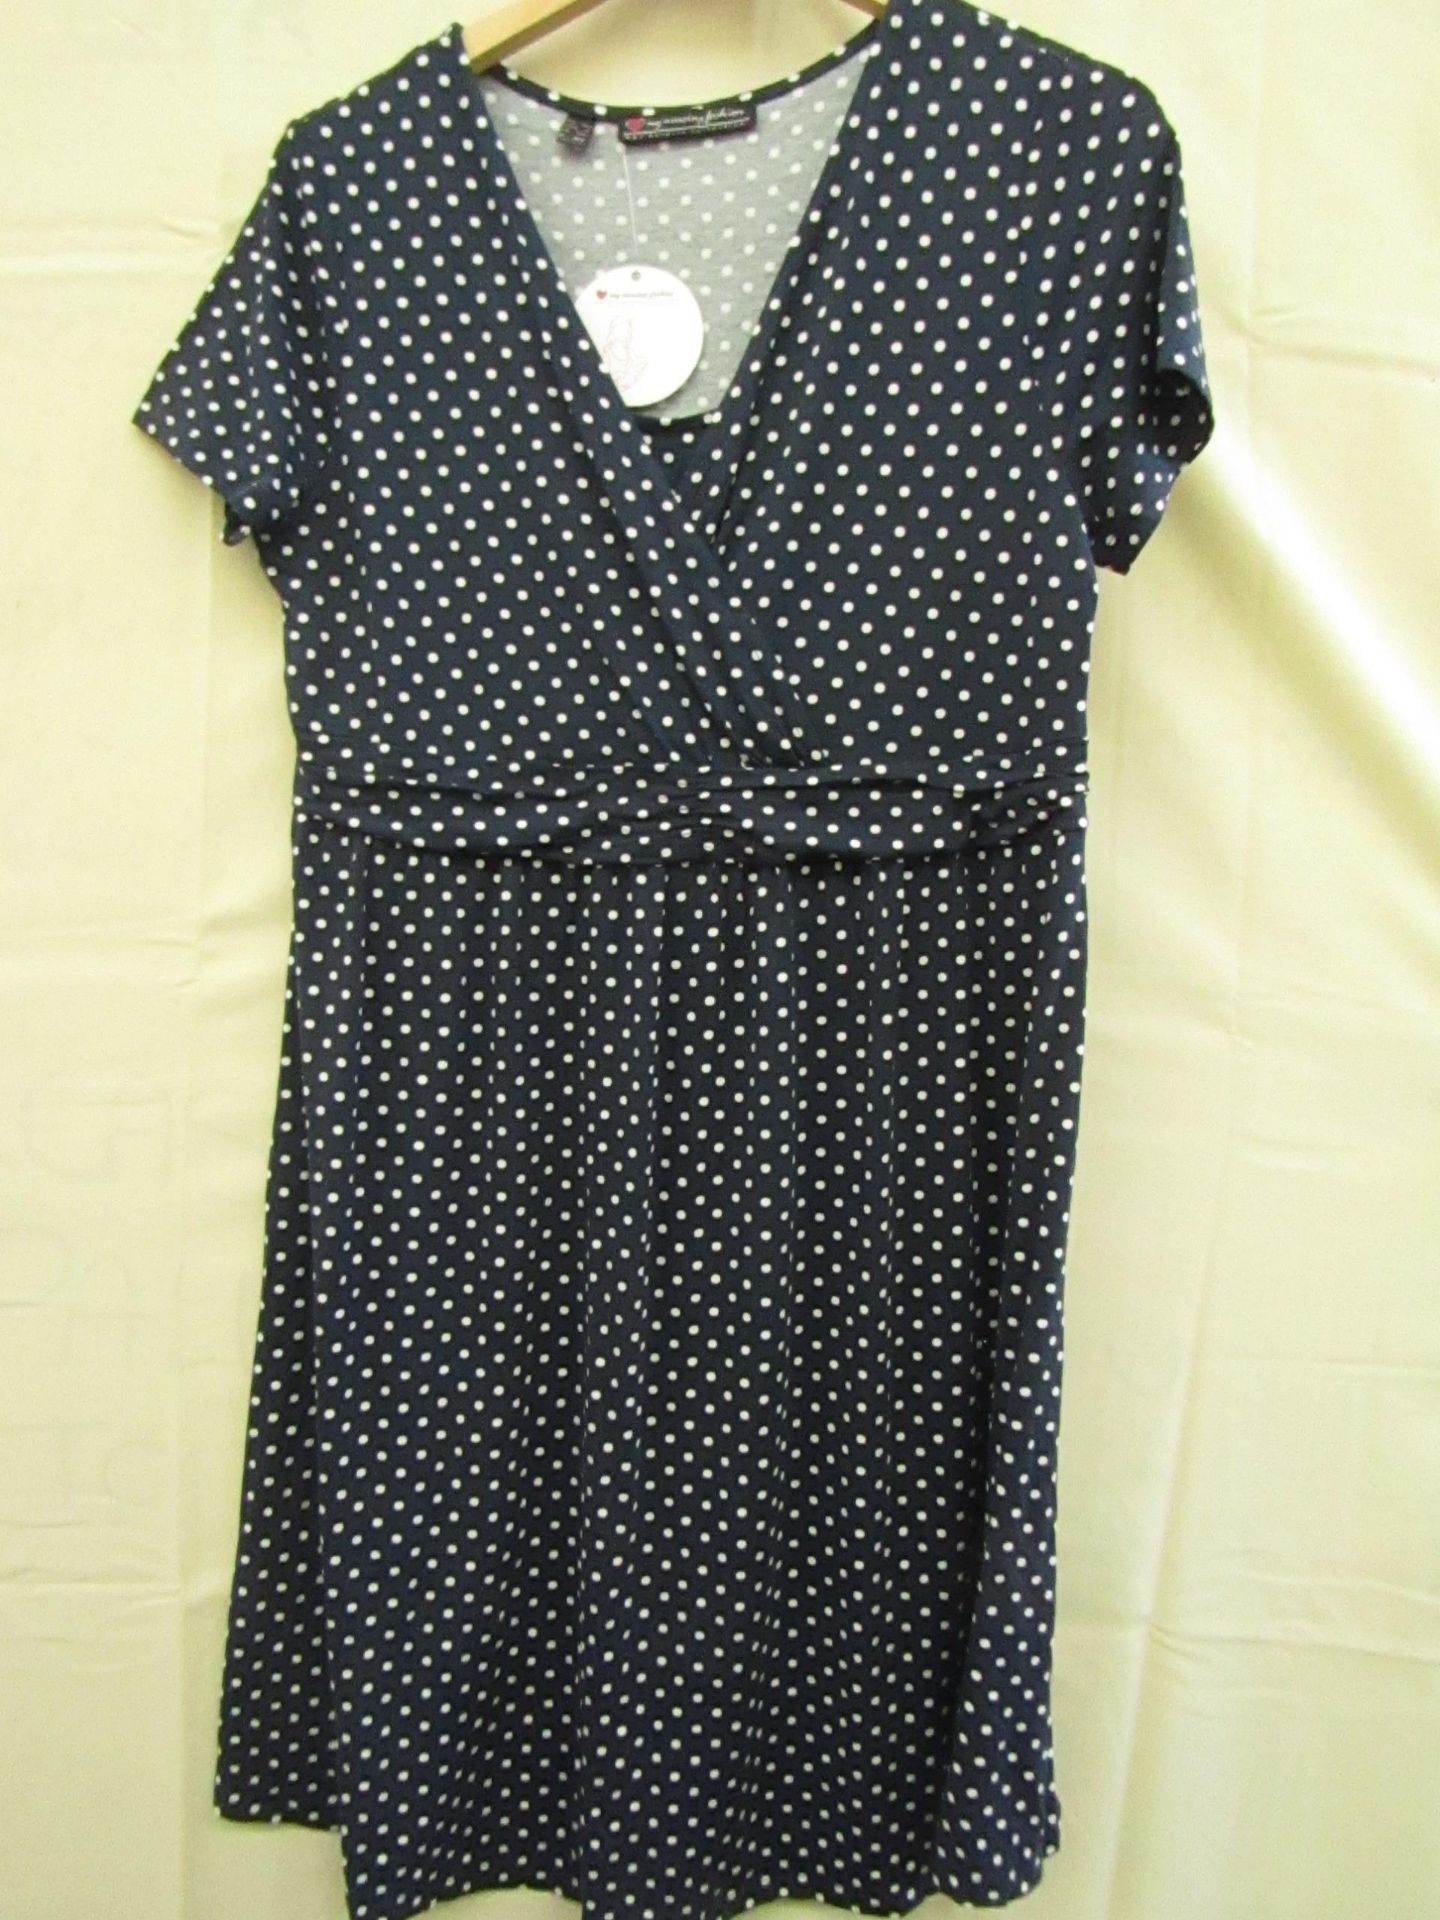 BPC Nursing Dress Navy With White Spots Size M Looks n Unworn Tags Attatched